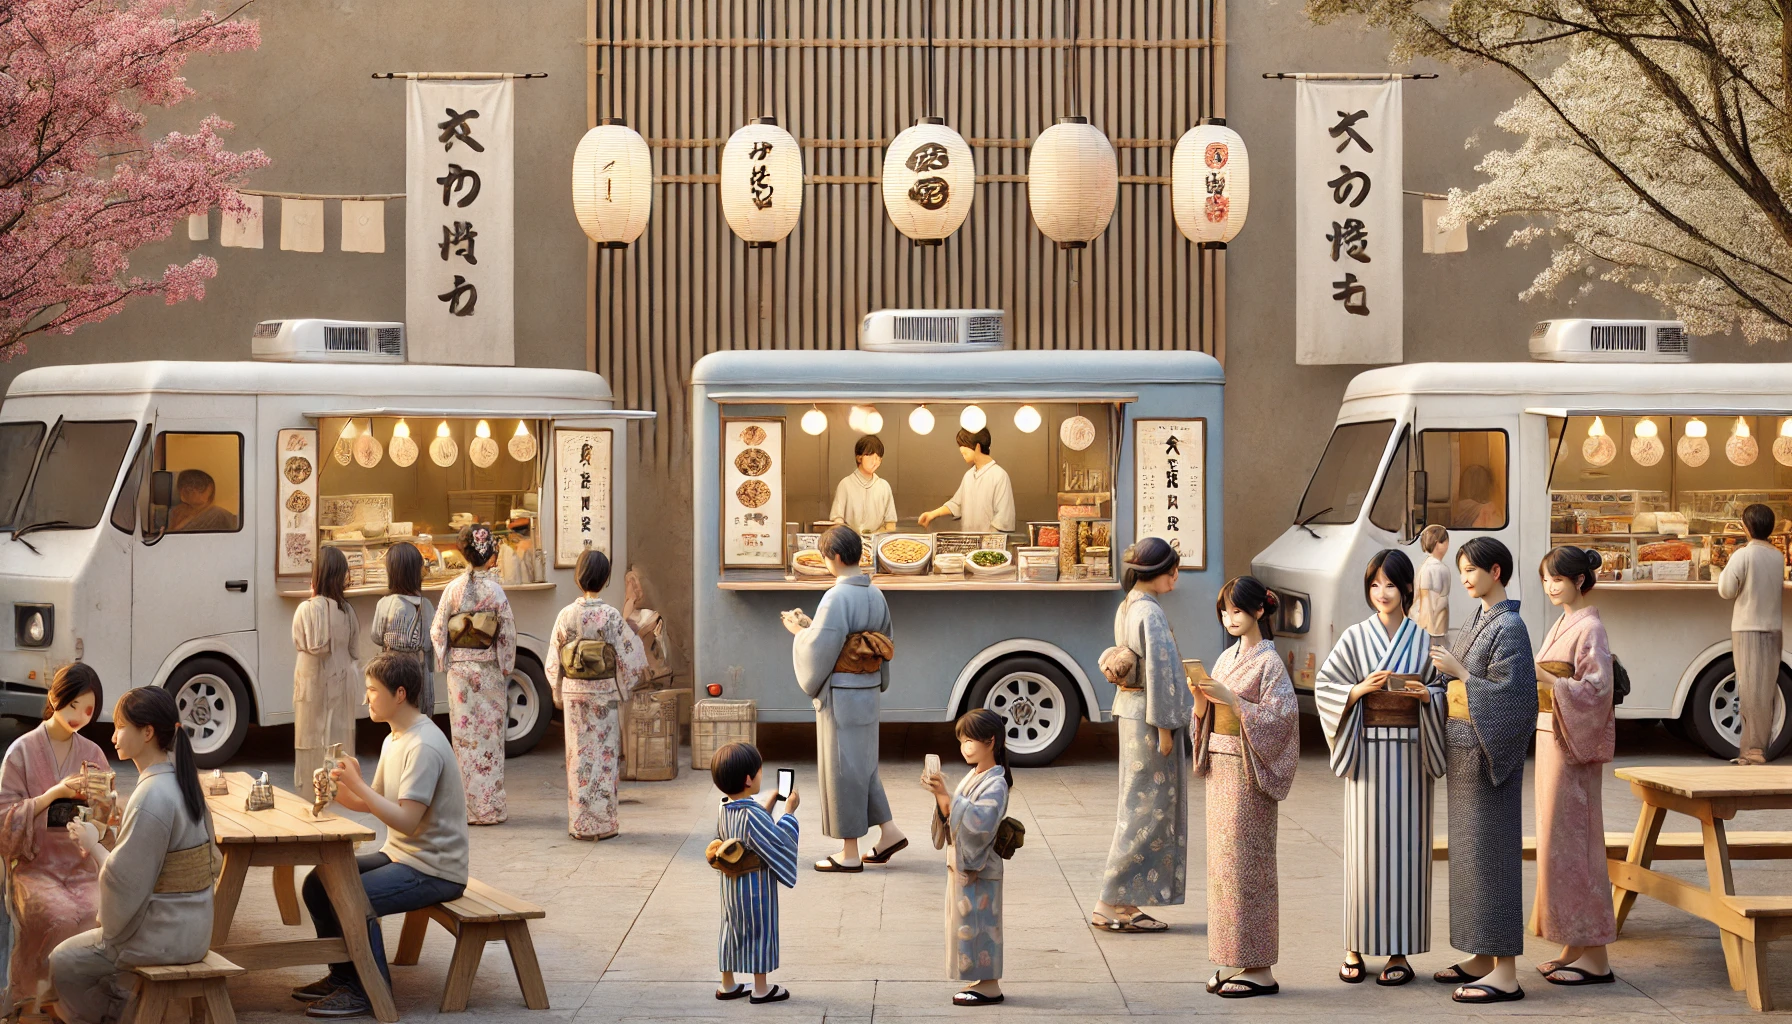 A subdued, Japanese-themed event scene with three food trucks lined up, serving a variety of dishes to happy visitors. The background includes traditi